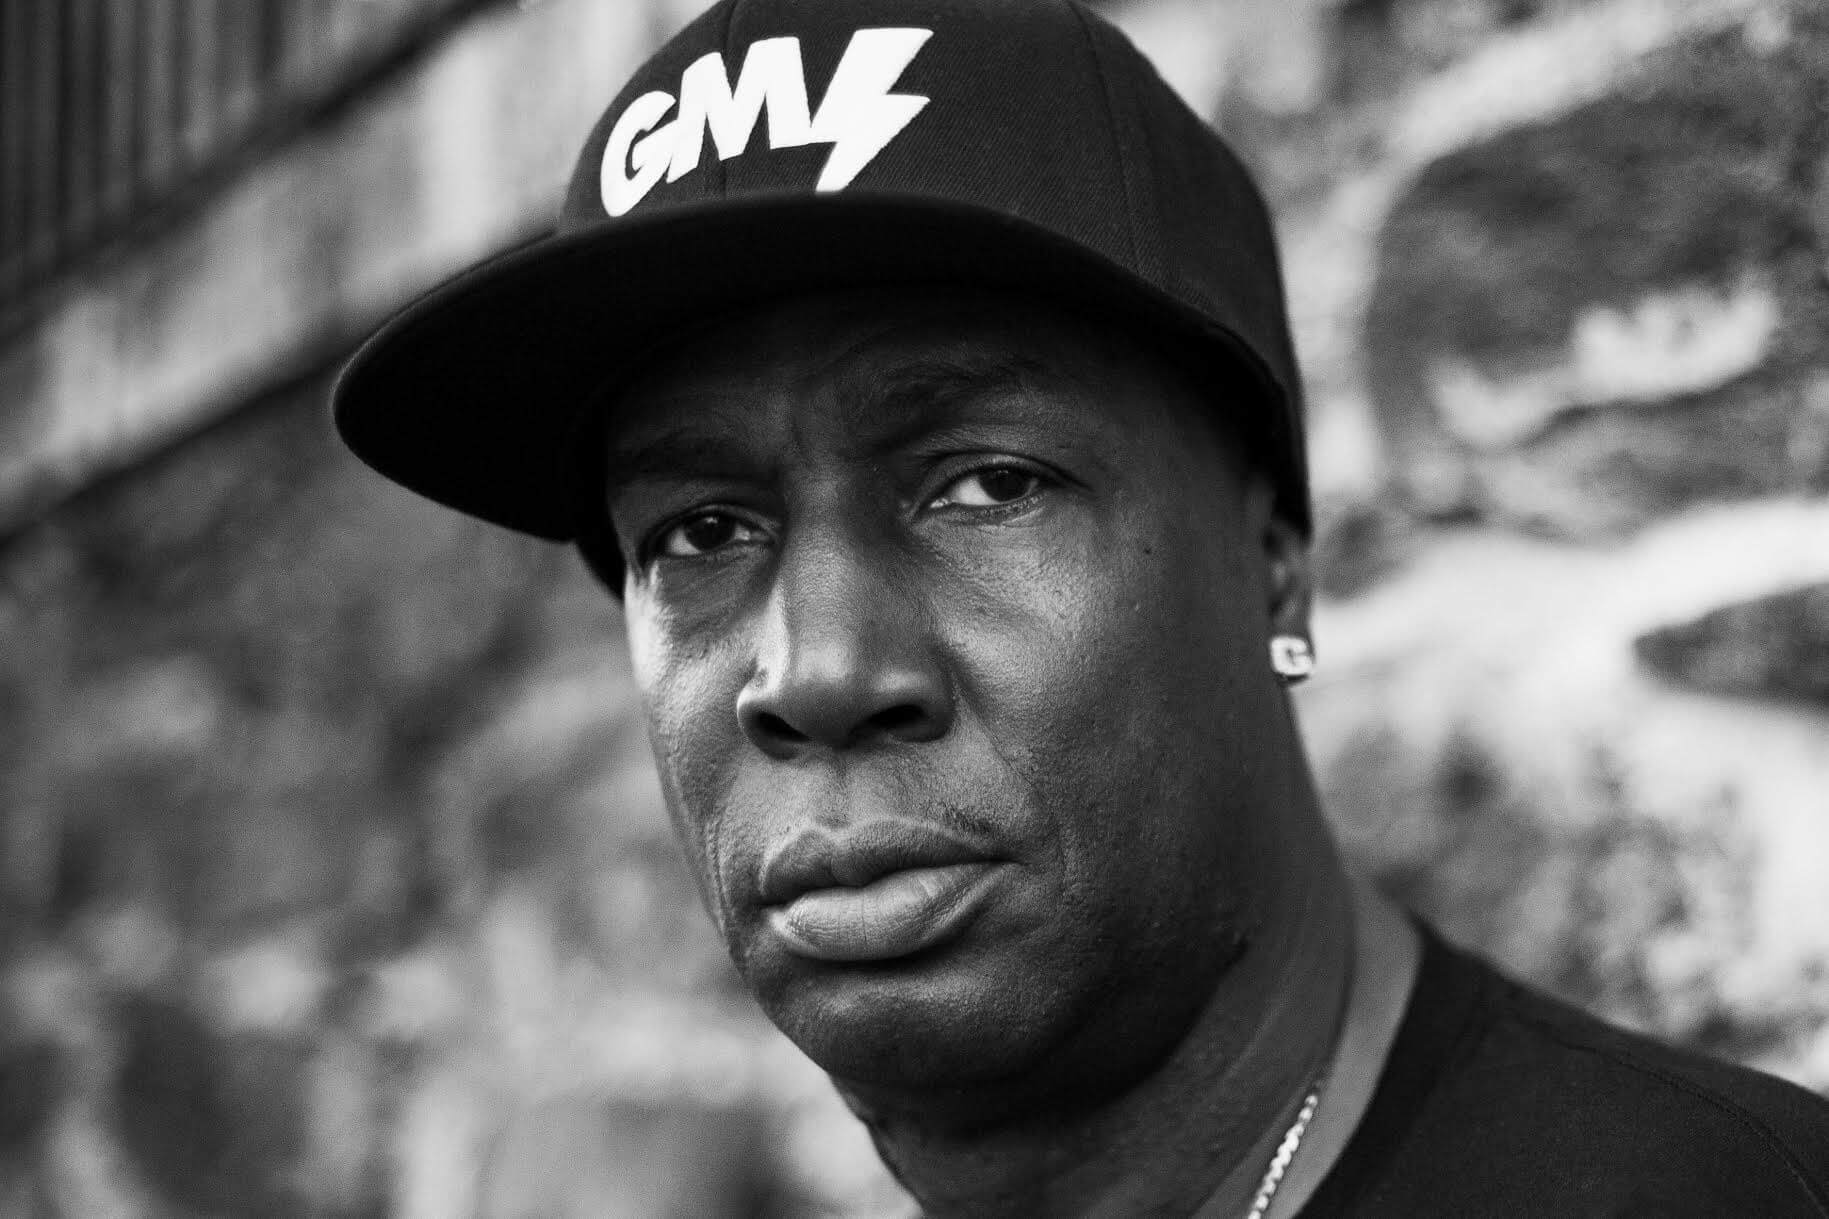 Flash it up mix - Grandmaster Flash & the Furious five turntable mix